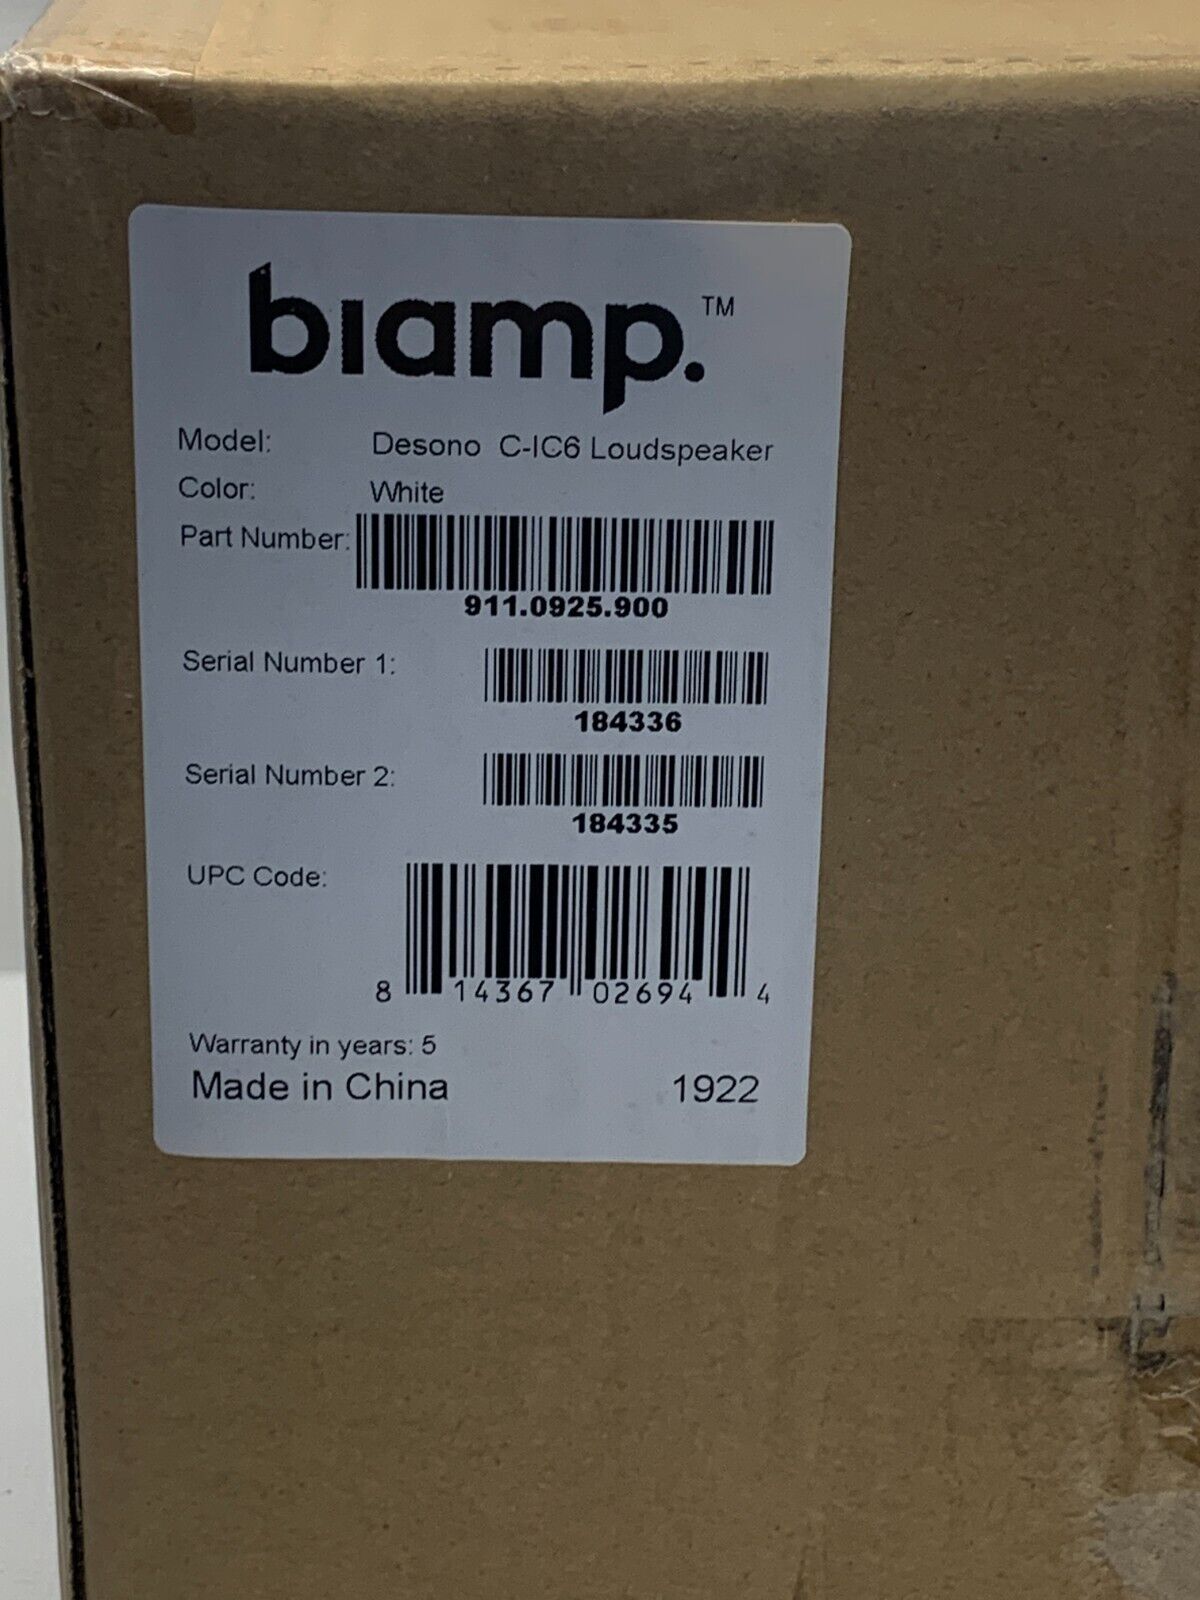 Biamp Desono C-IC6 2-Way 6.5" 60W Conferencing Ceiling Speaker - 911.0925.900